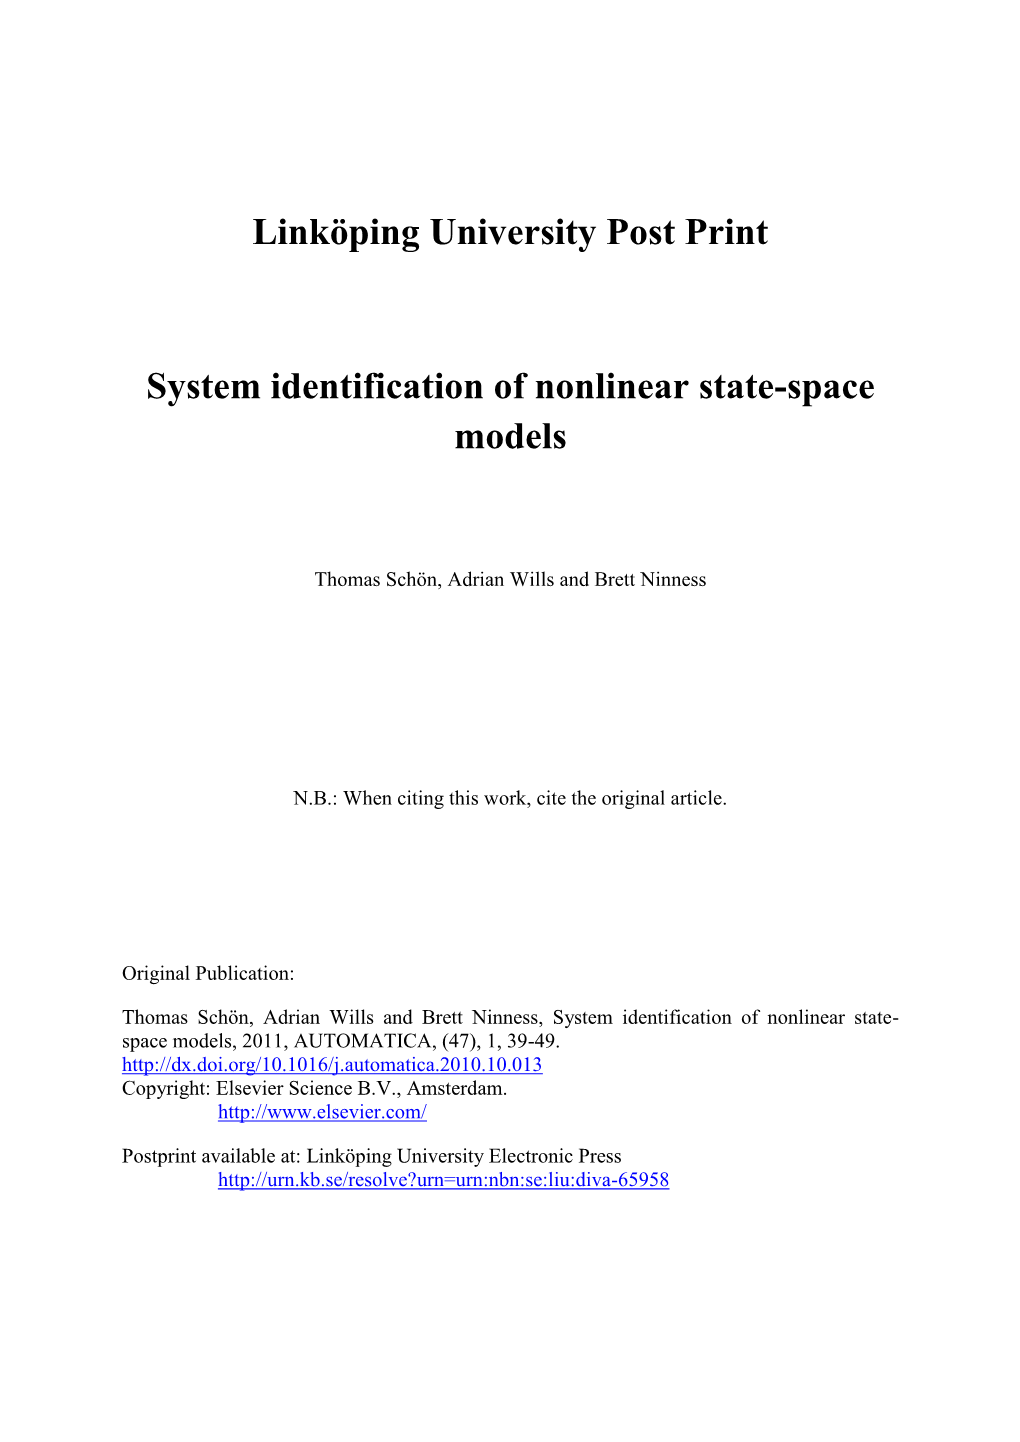 System Identification of Nonlinear State-Space Models